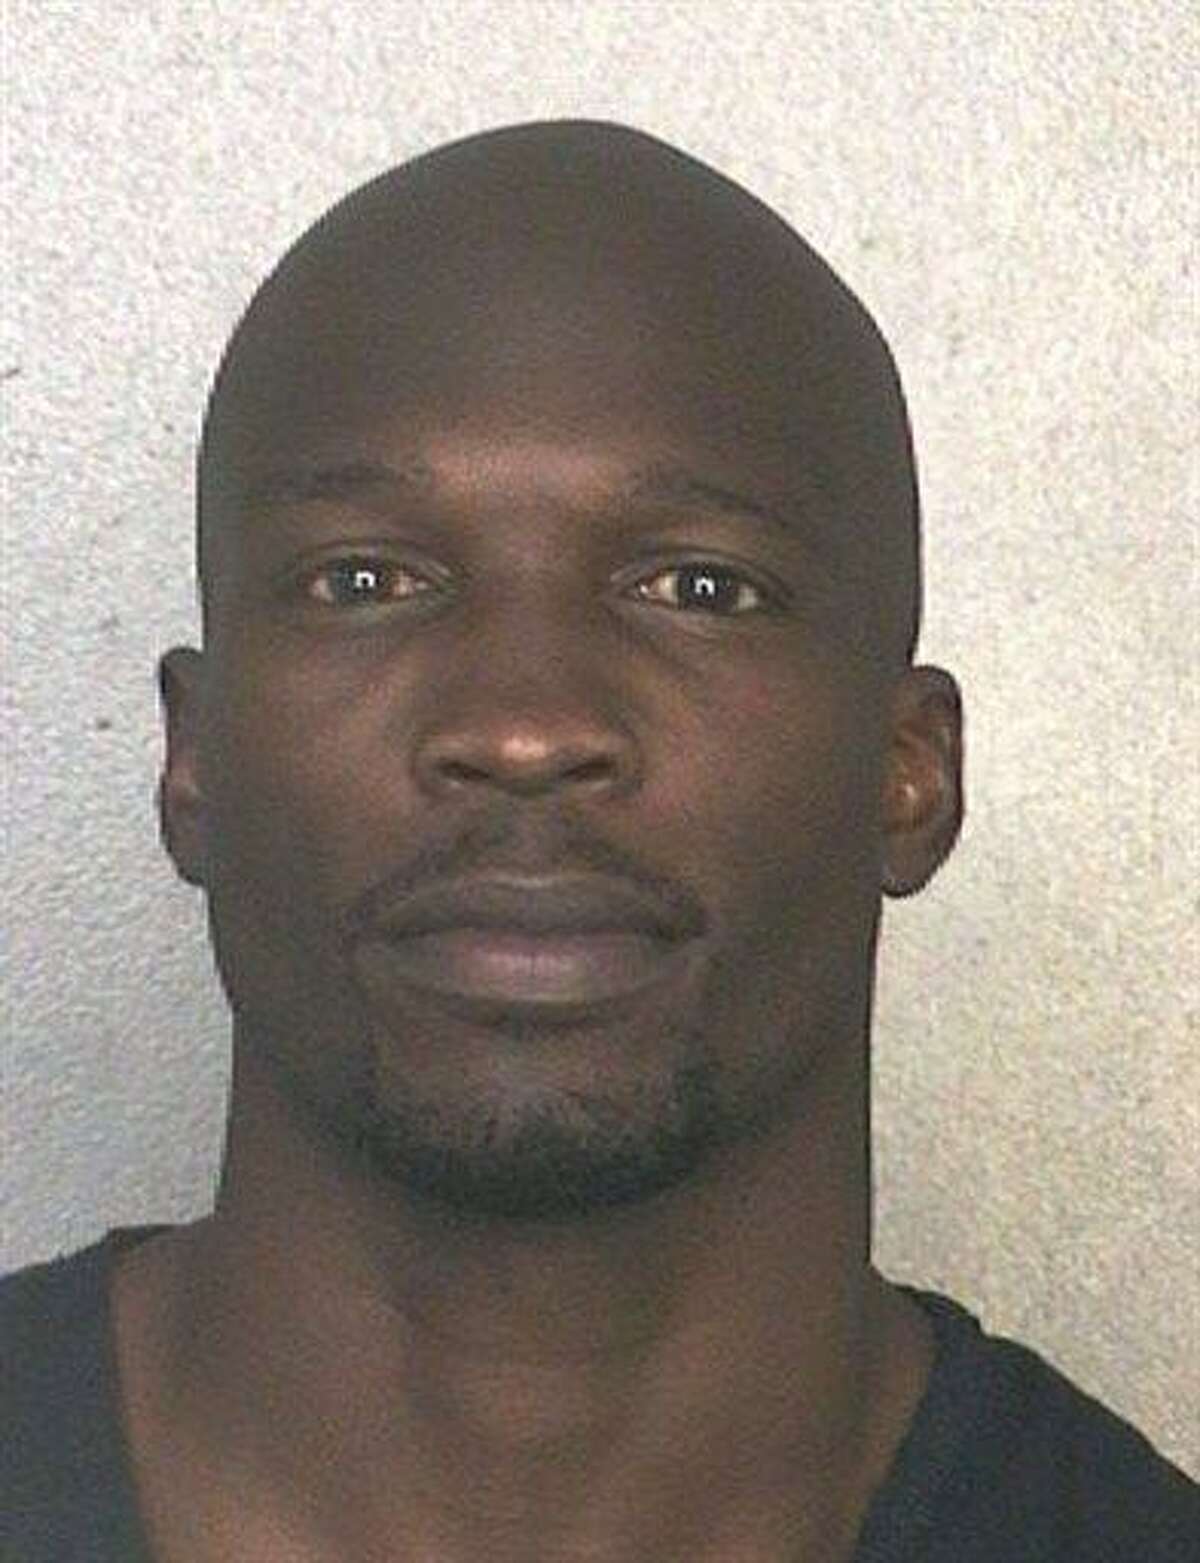 This arrest photo made available by the Broward County Sheriff's Office shows former NFL wide receiver Chad Johnson Monday, May 20, 2013. Johnson has been arrested on charges that he violated probation stemming from an altercation with his now ex-wife, TV reality star Evelyn Lozada. A Broward County judge ordered Johnson jailed Monday until he posts a $1,000 bond. (AP Photo/Broward County Sheriff's Office)